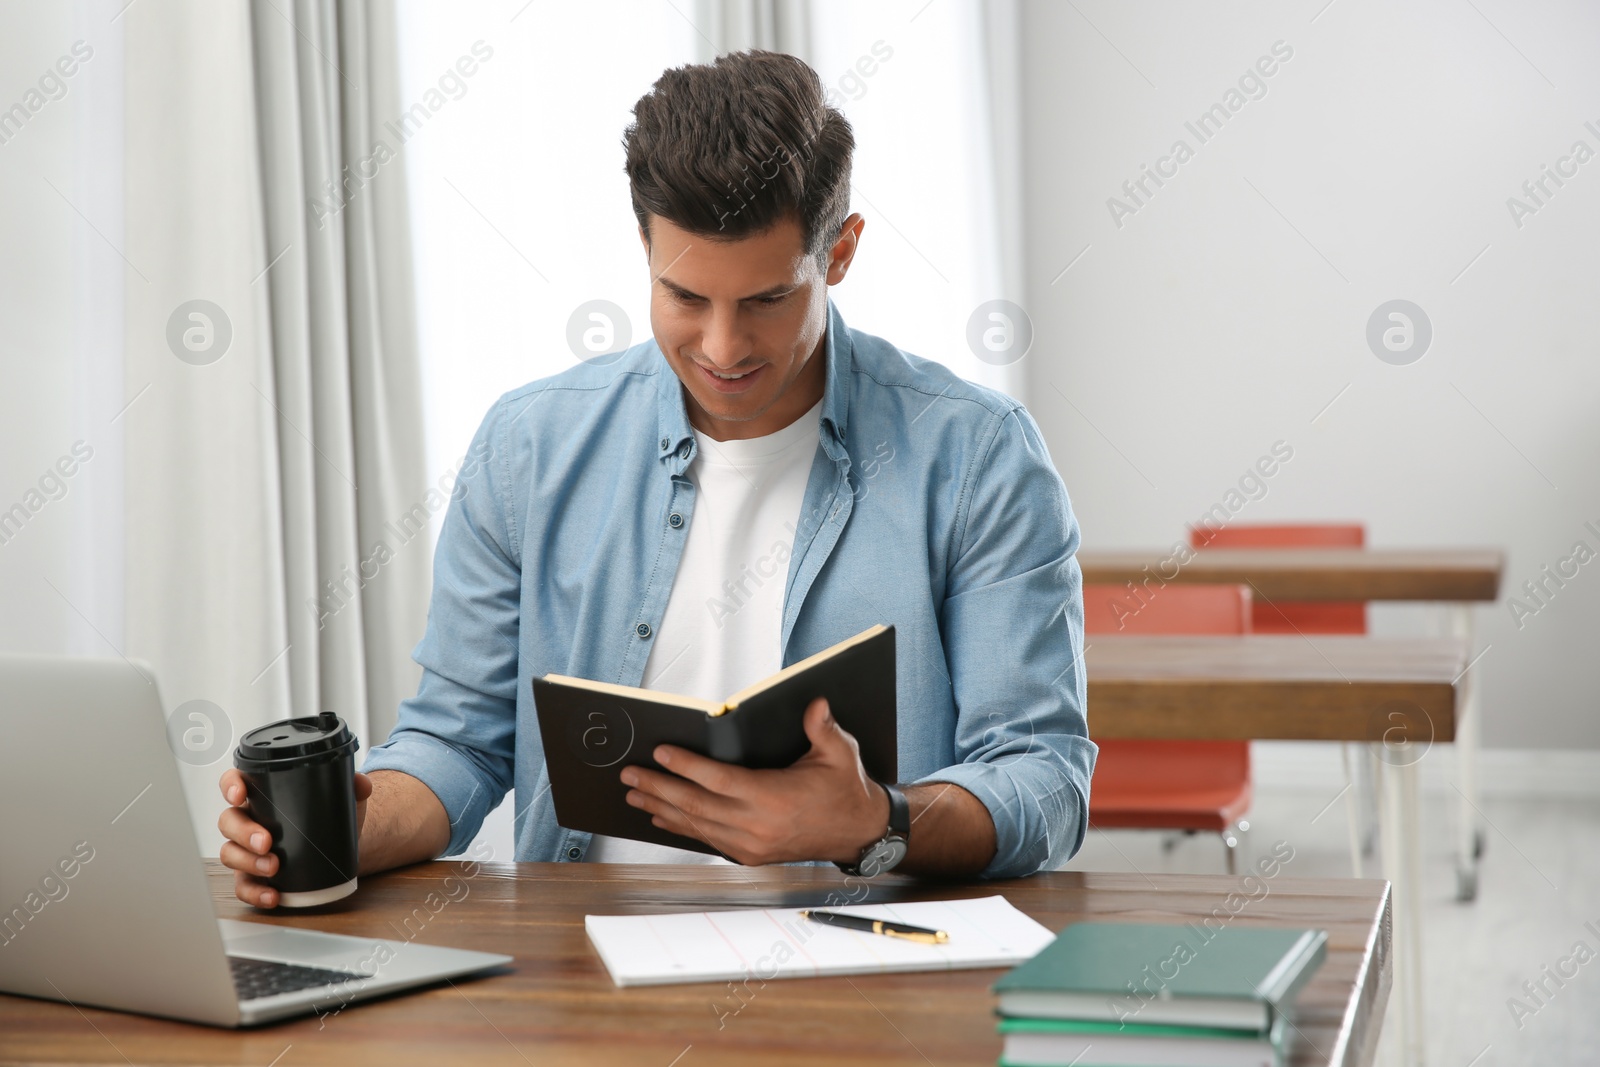 Photo of Man reading book at table in library